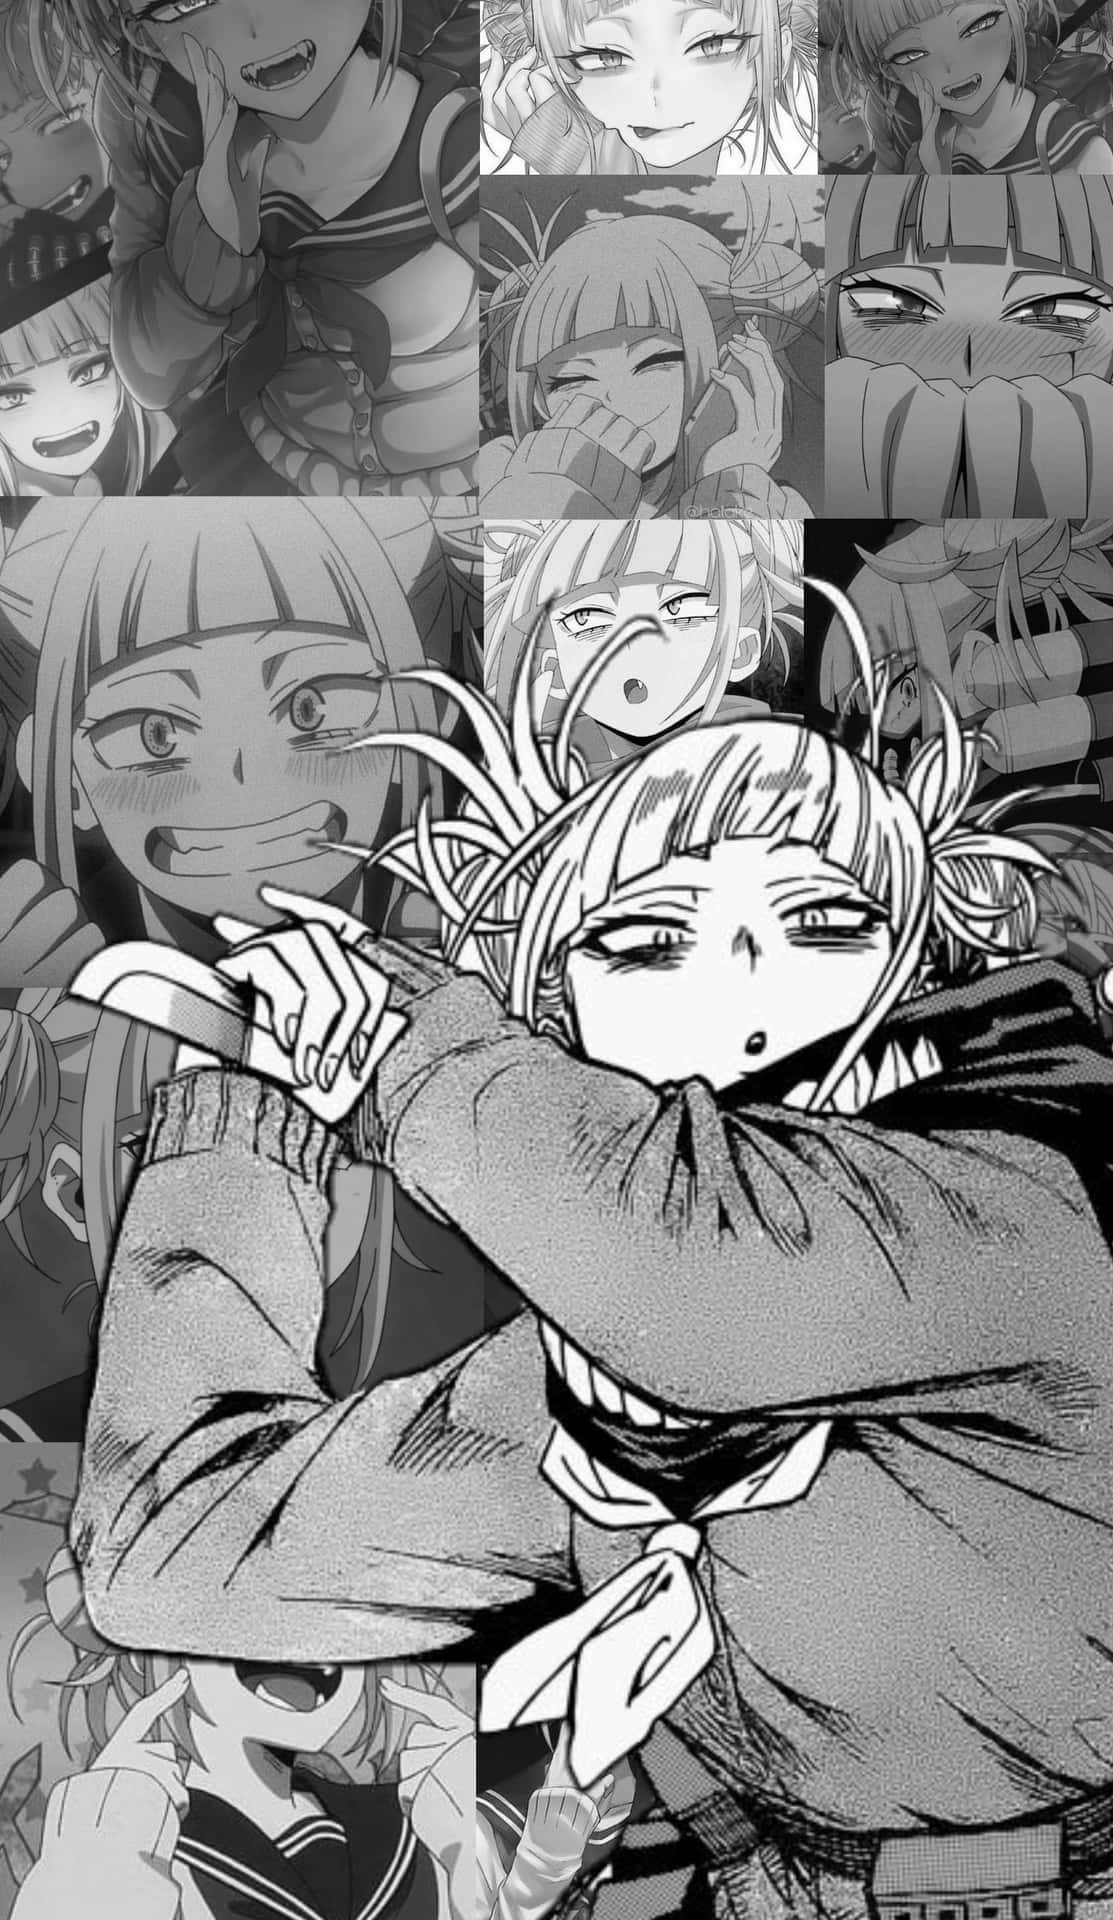 "Bring out your wild side with this Himiko Toga Aesthetic wallpaper". Wallpaper